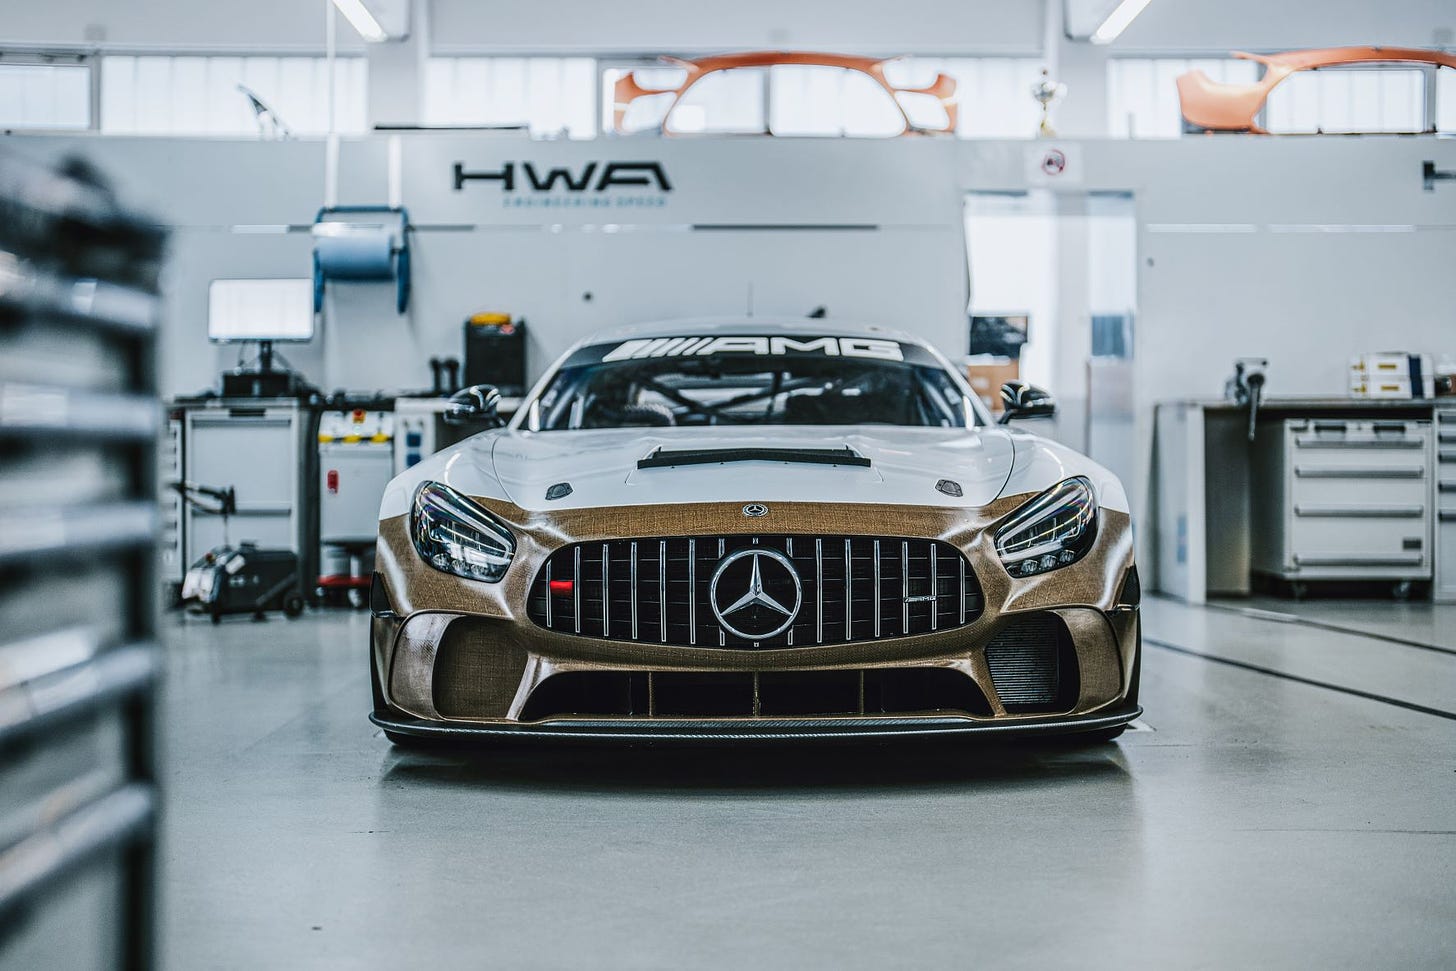 Mercedes-AMG GT4 race cars with natural fibre composite bumpers